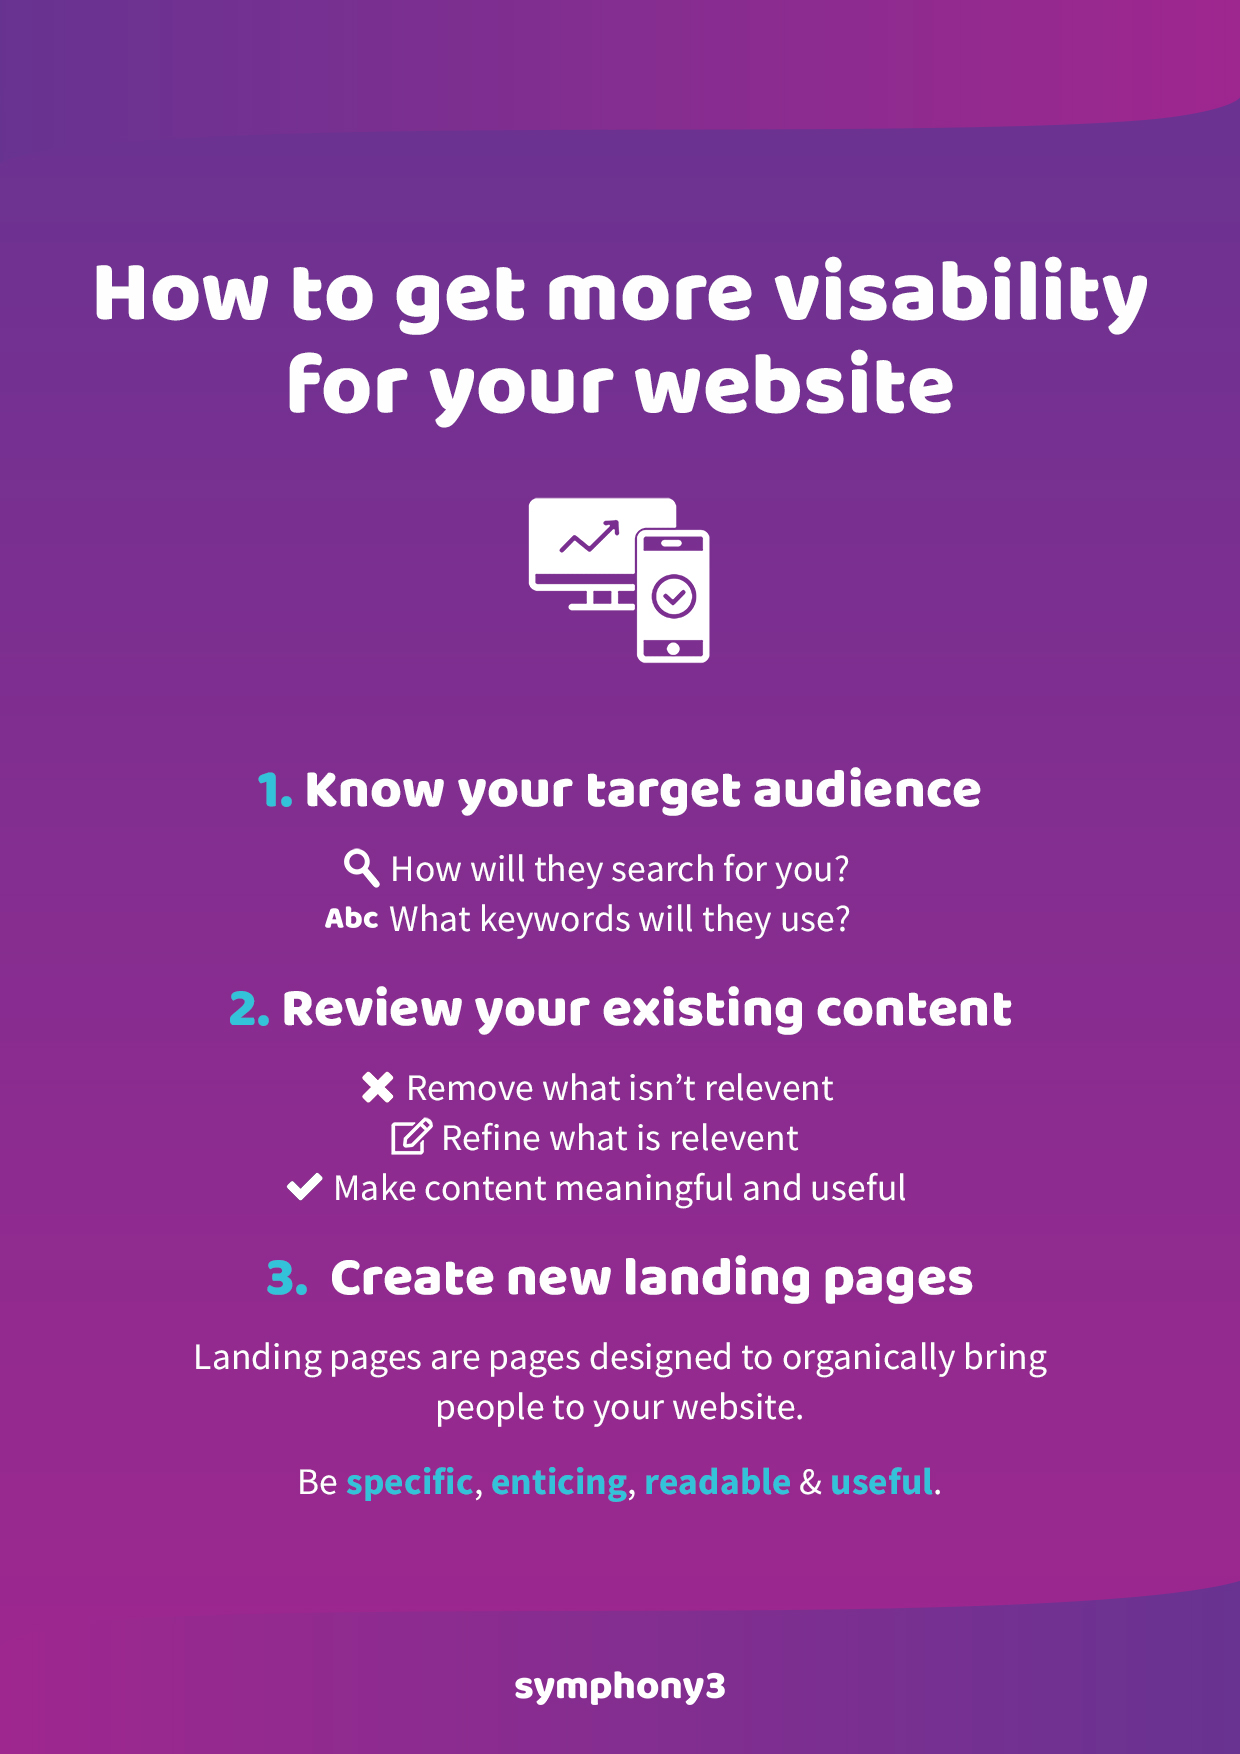 How to get get more visibility on your website poster